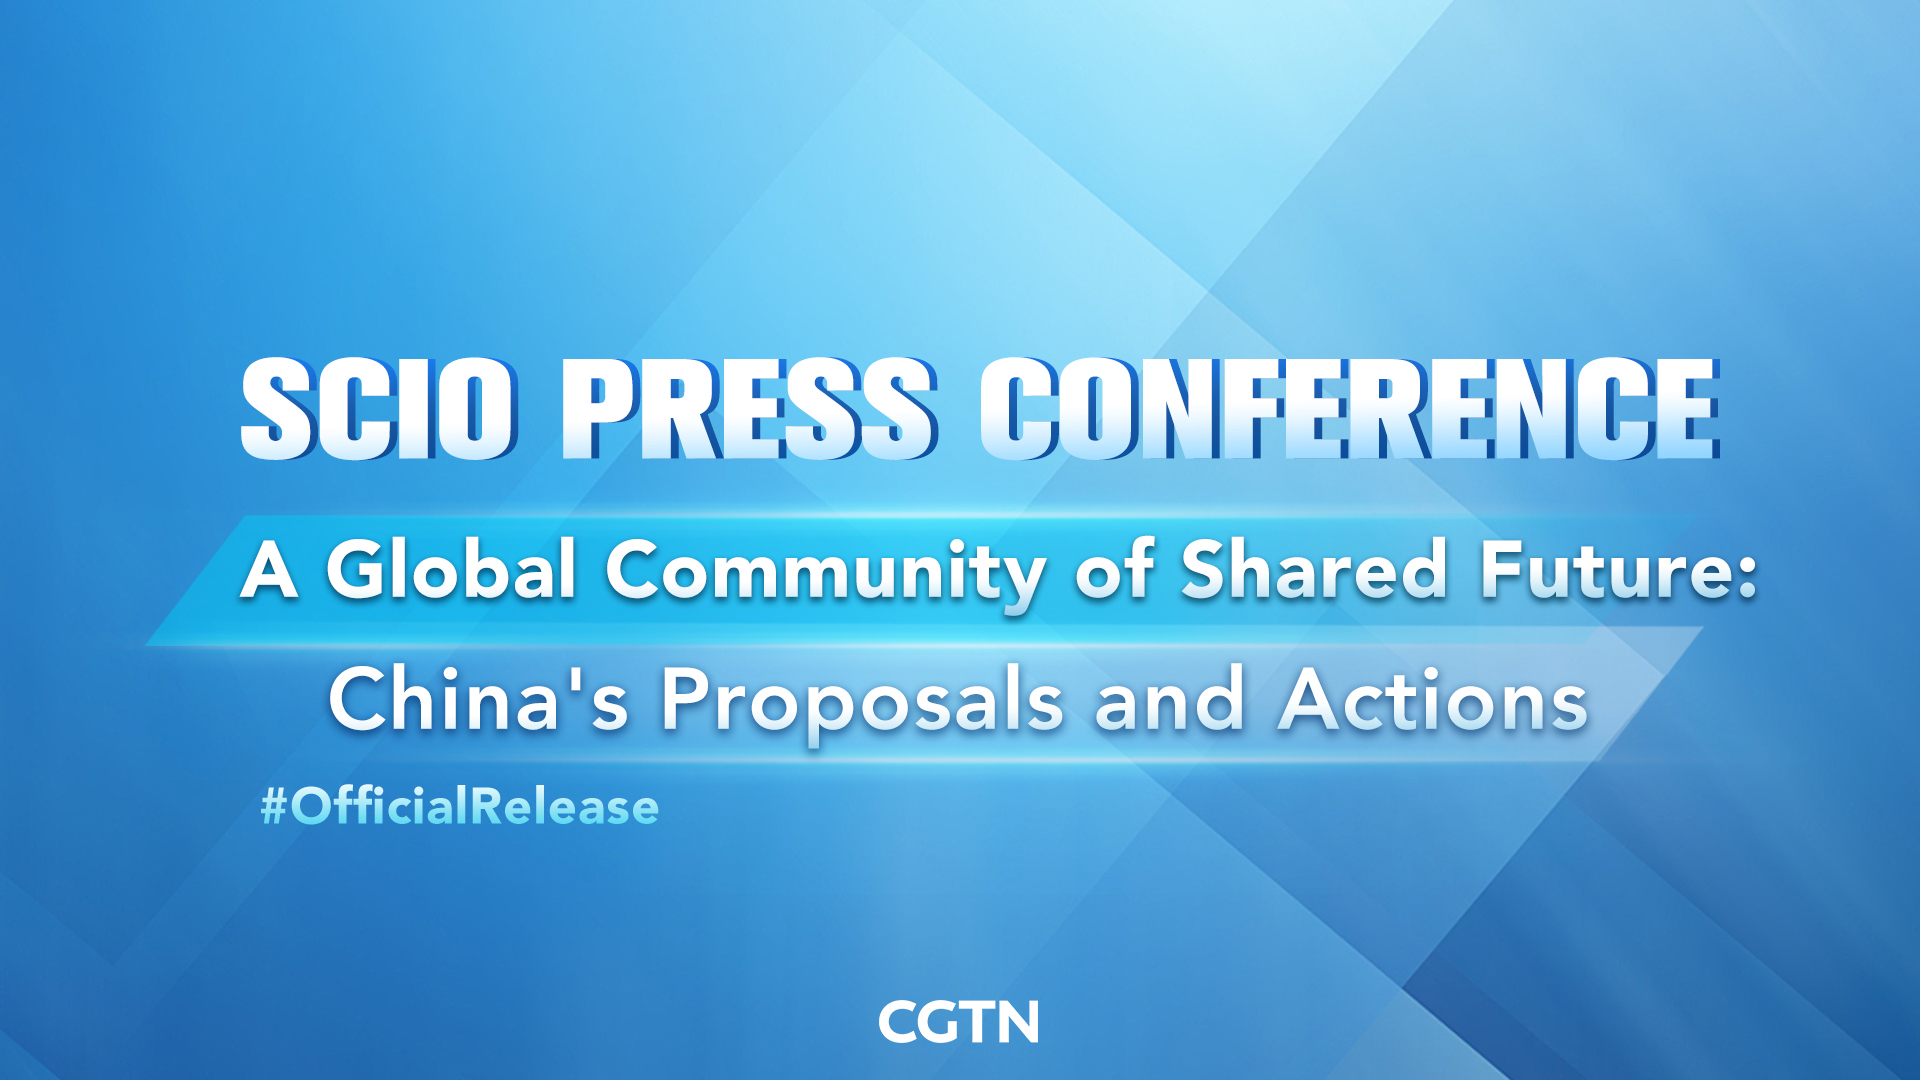 Live: China issues white paper on 'A Global Community of Shared Future: China's Proposals and Actions'